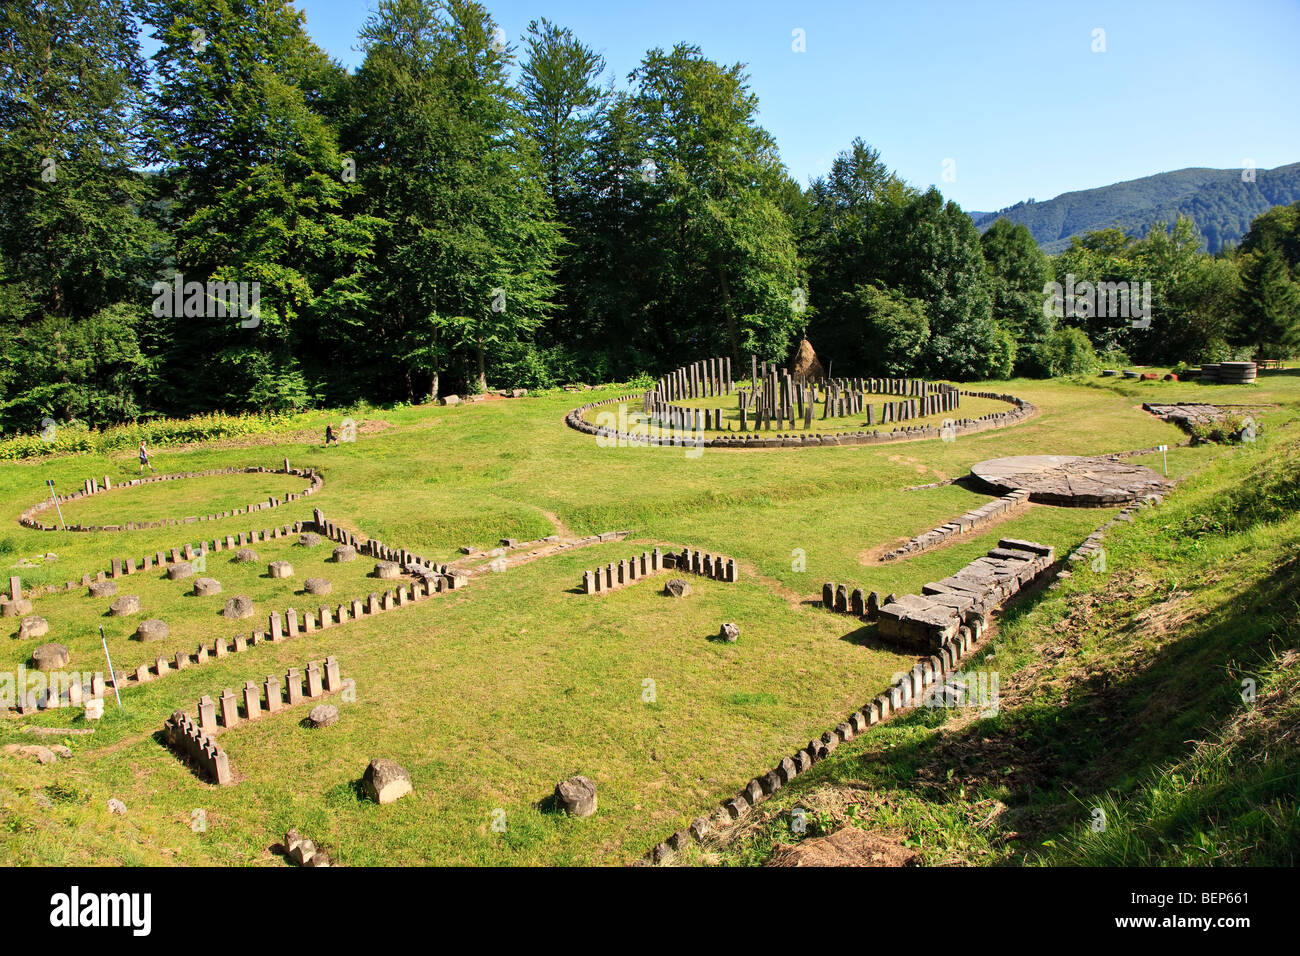 Overview sanctuary of the stronghold Sarmizegetusa Regia (capital of the dacian kingdom before the roman conquest), Romania Stock Photo